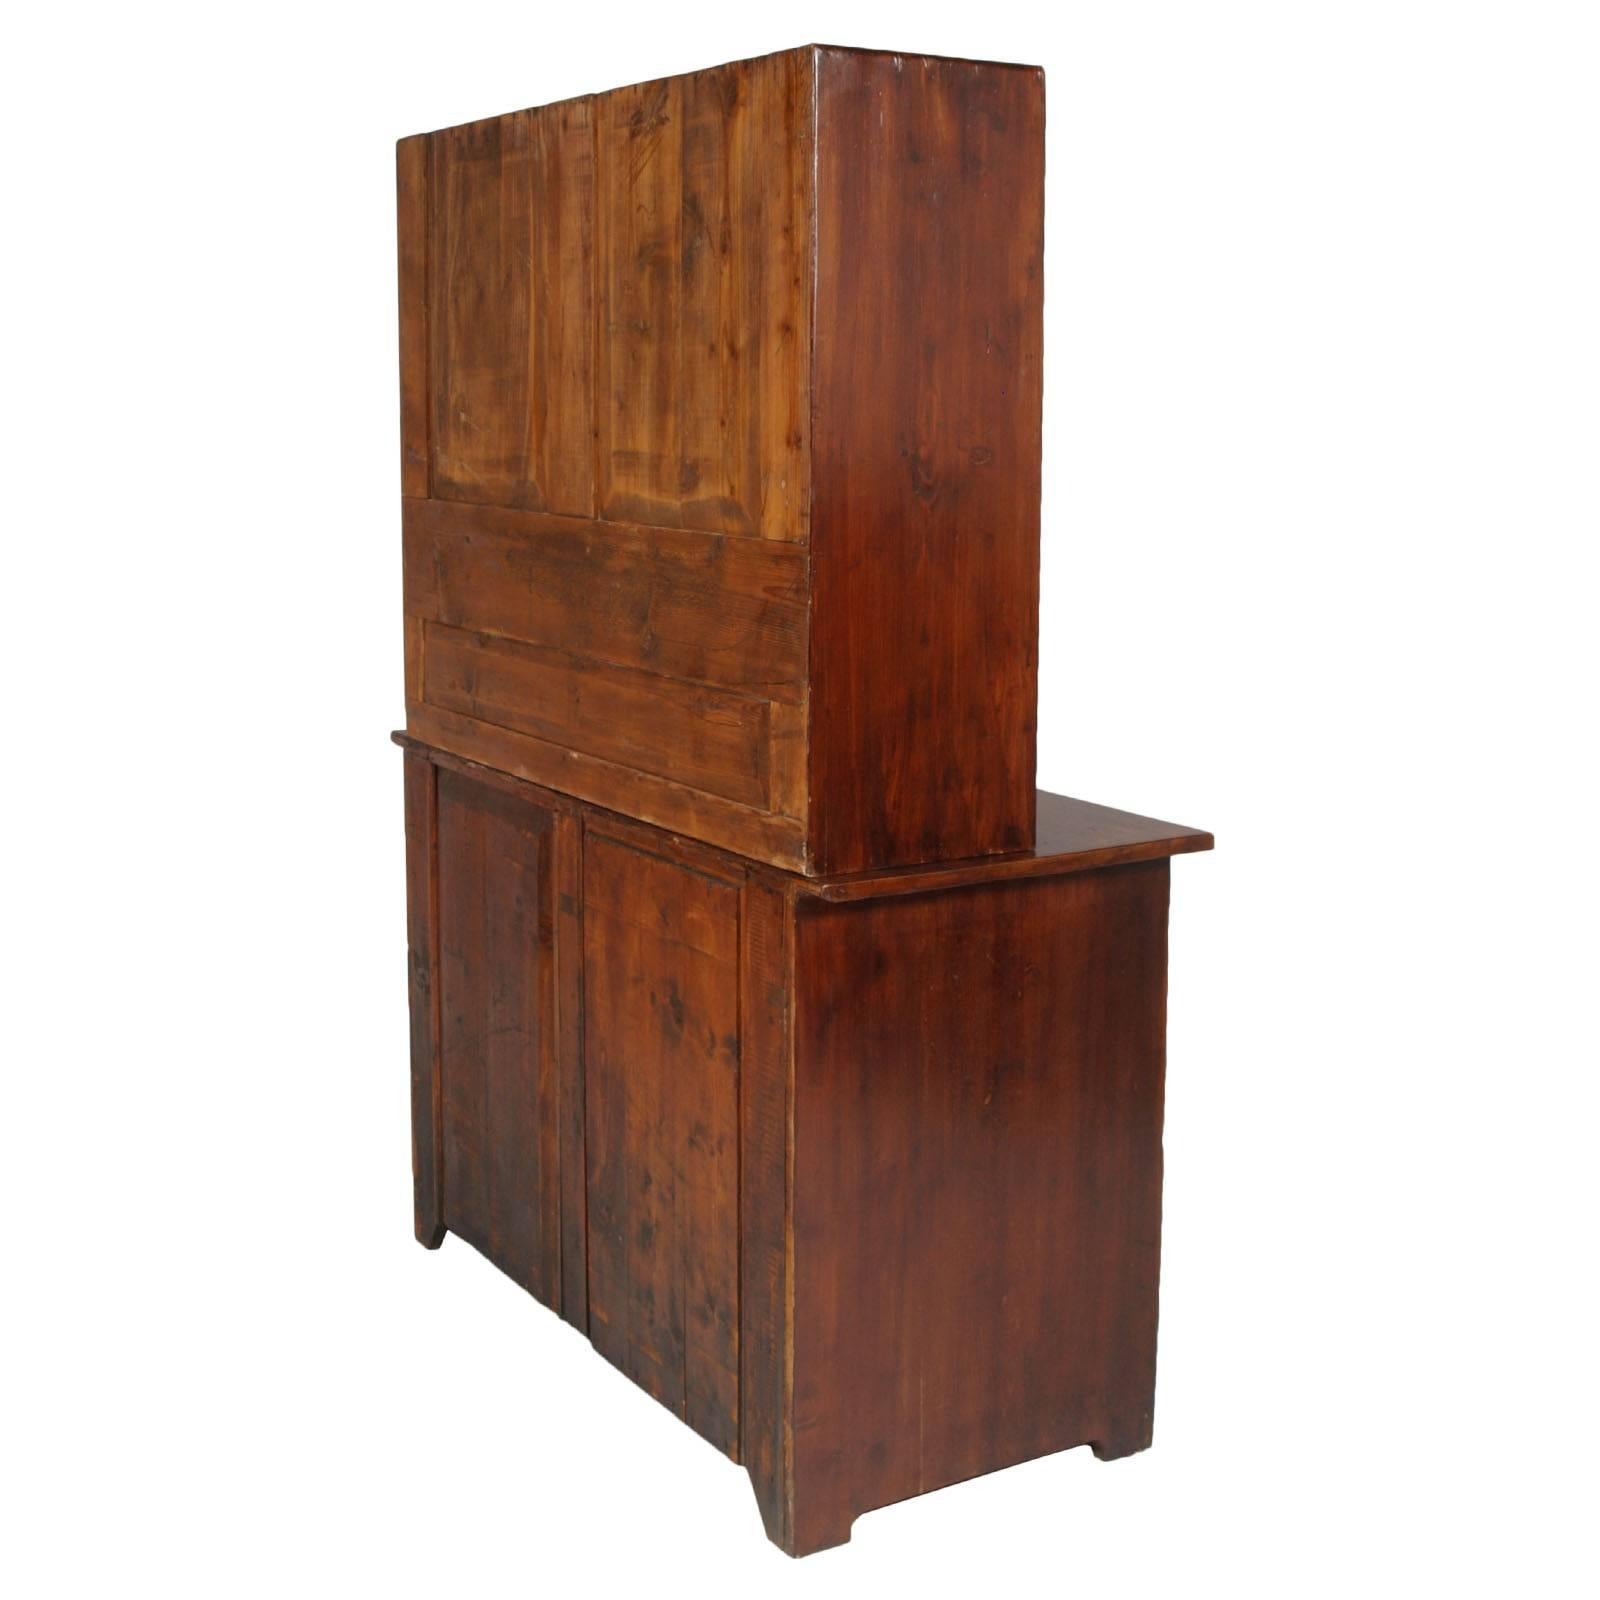 20th Century Art Deco Country Credenza Sideboard with Display Cabinet, Solid Fir Wax-Polished